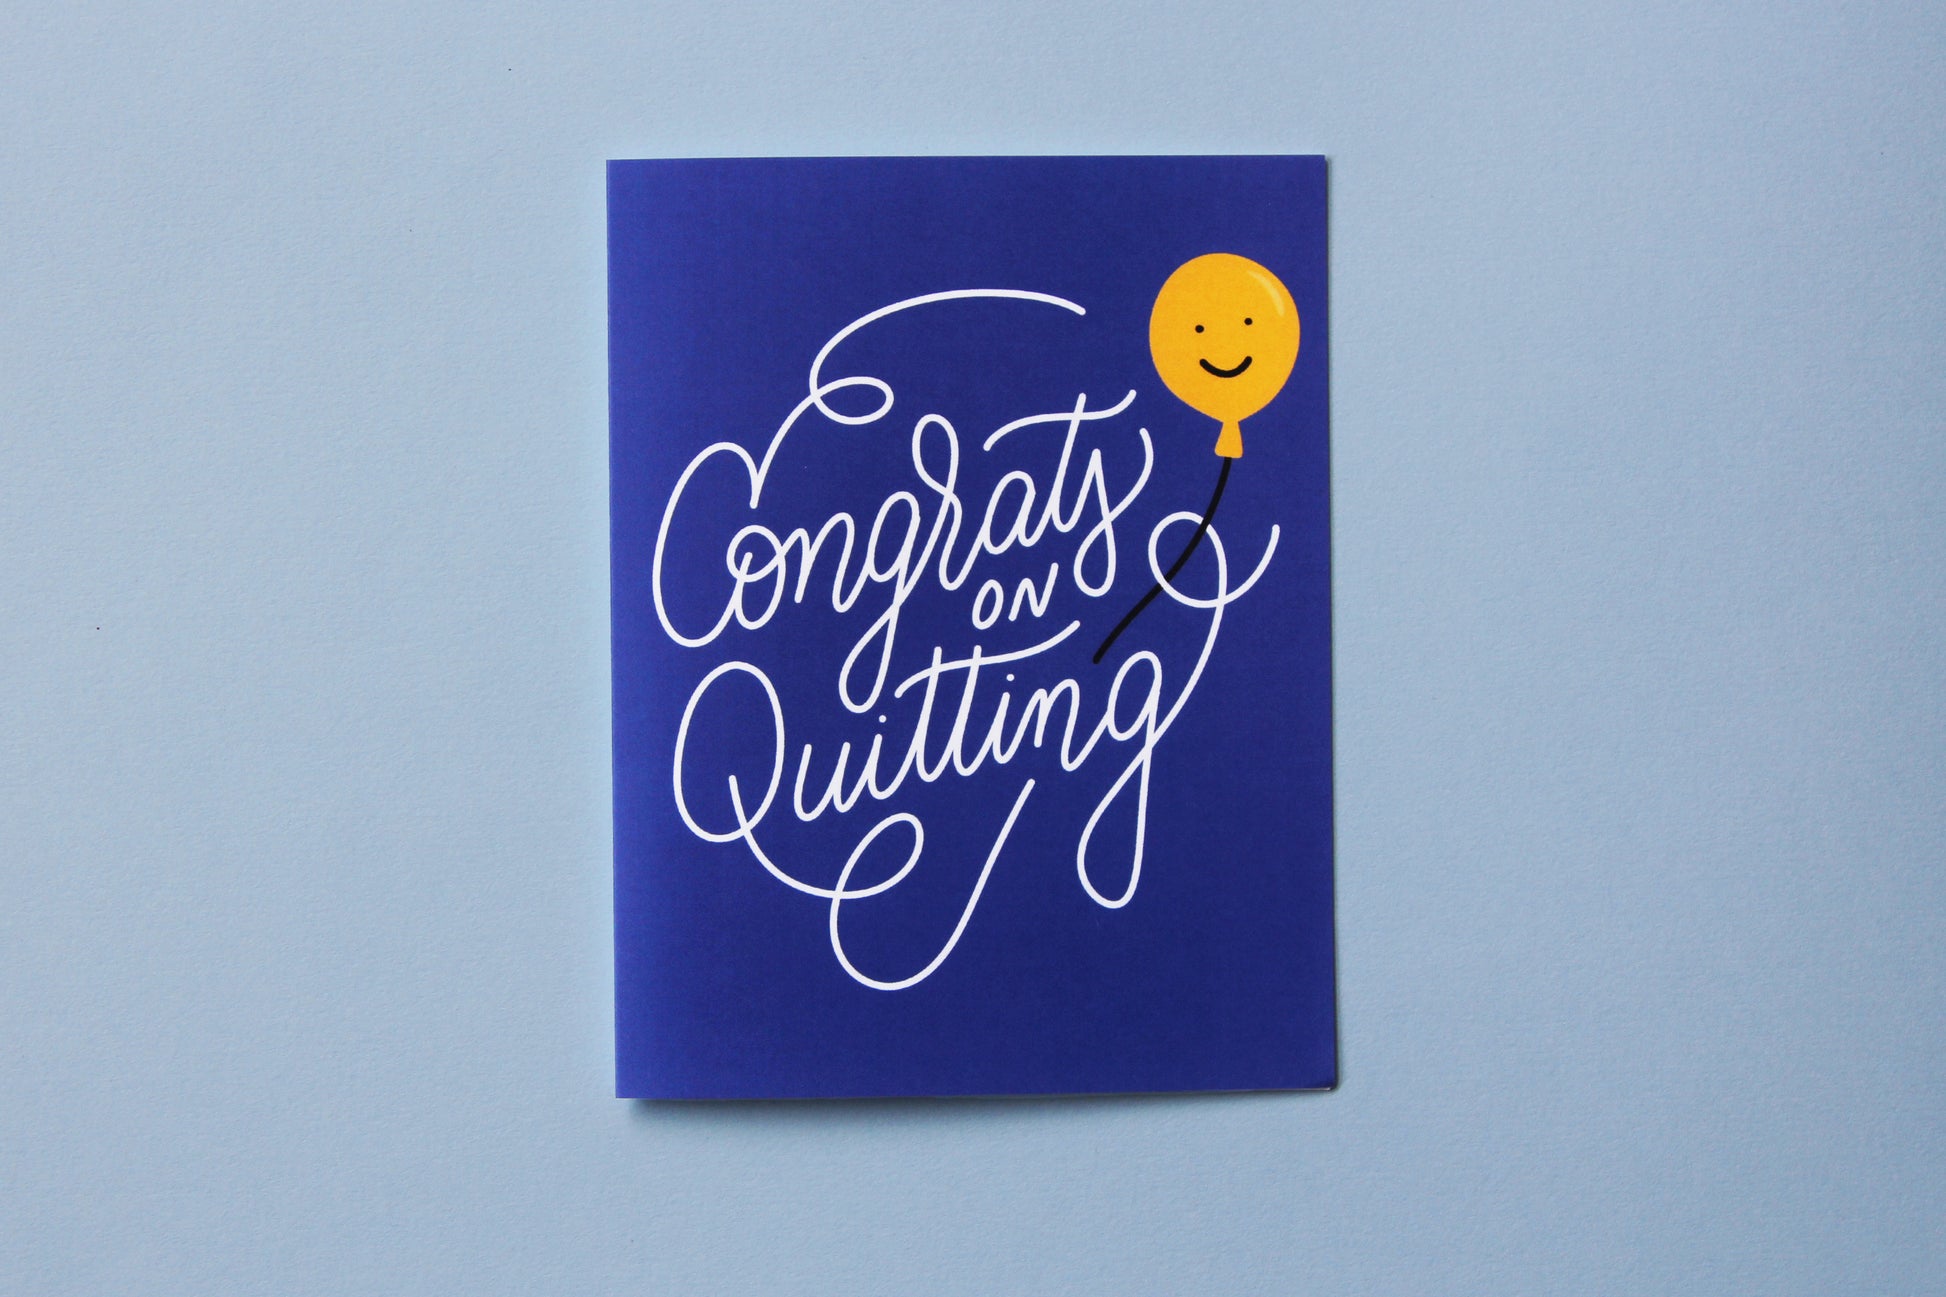 A photo of a blue greeting card with lettering that says "Congrats on Quitting" with a yellow smiley face balloon on a blue background.